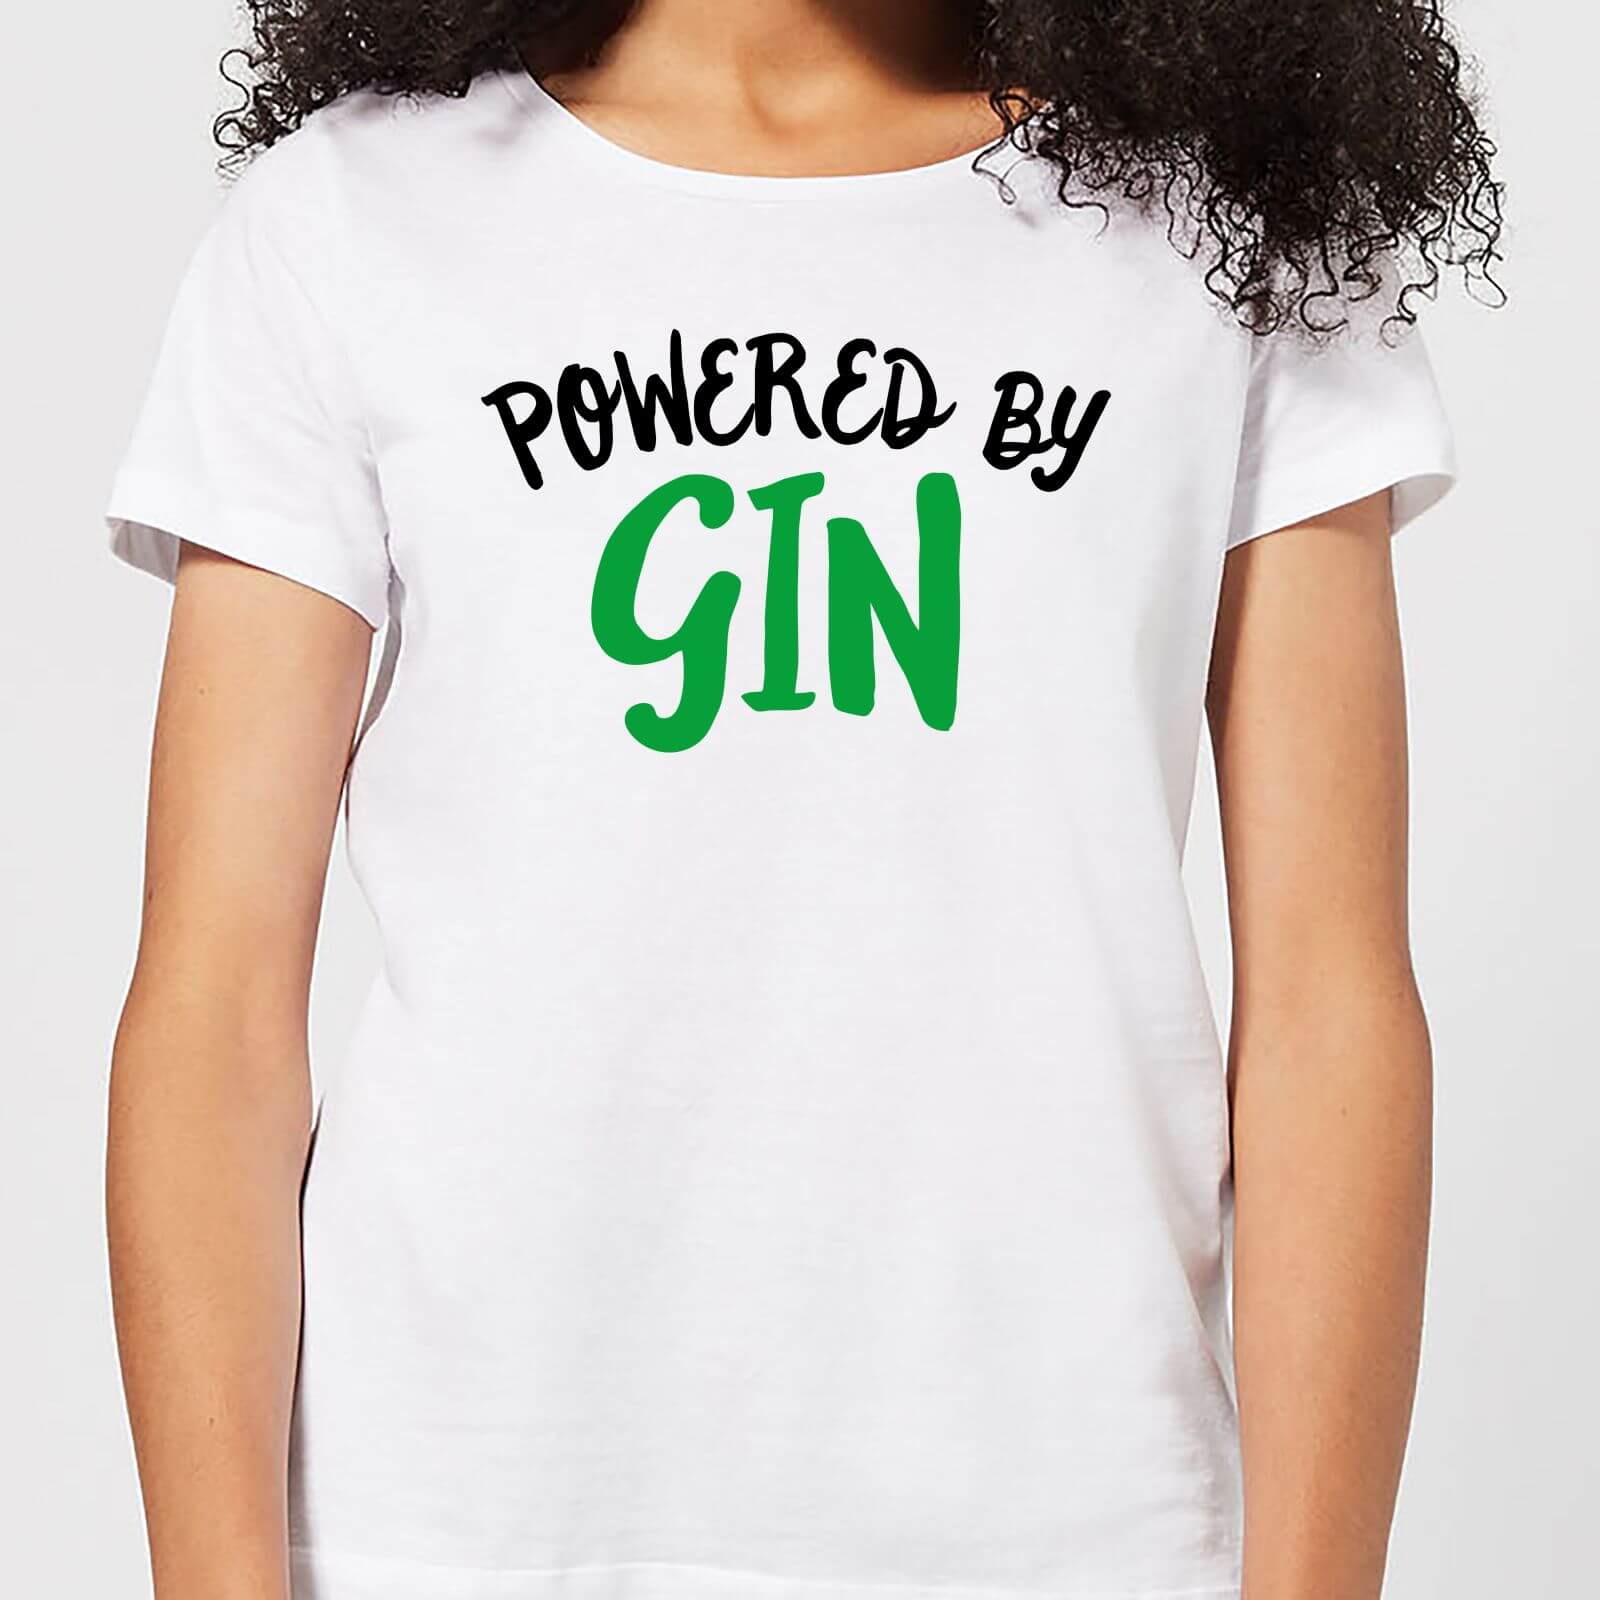 Powered By Gin Women's T-Shirt - White - L